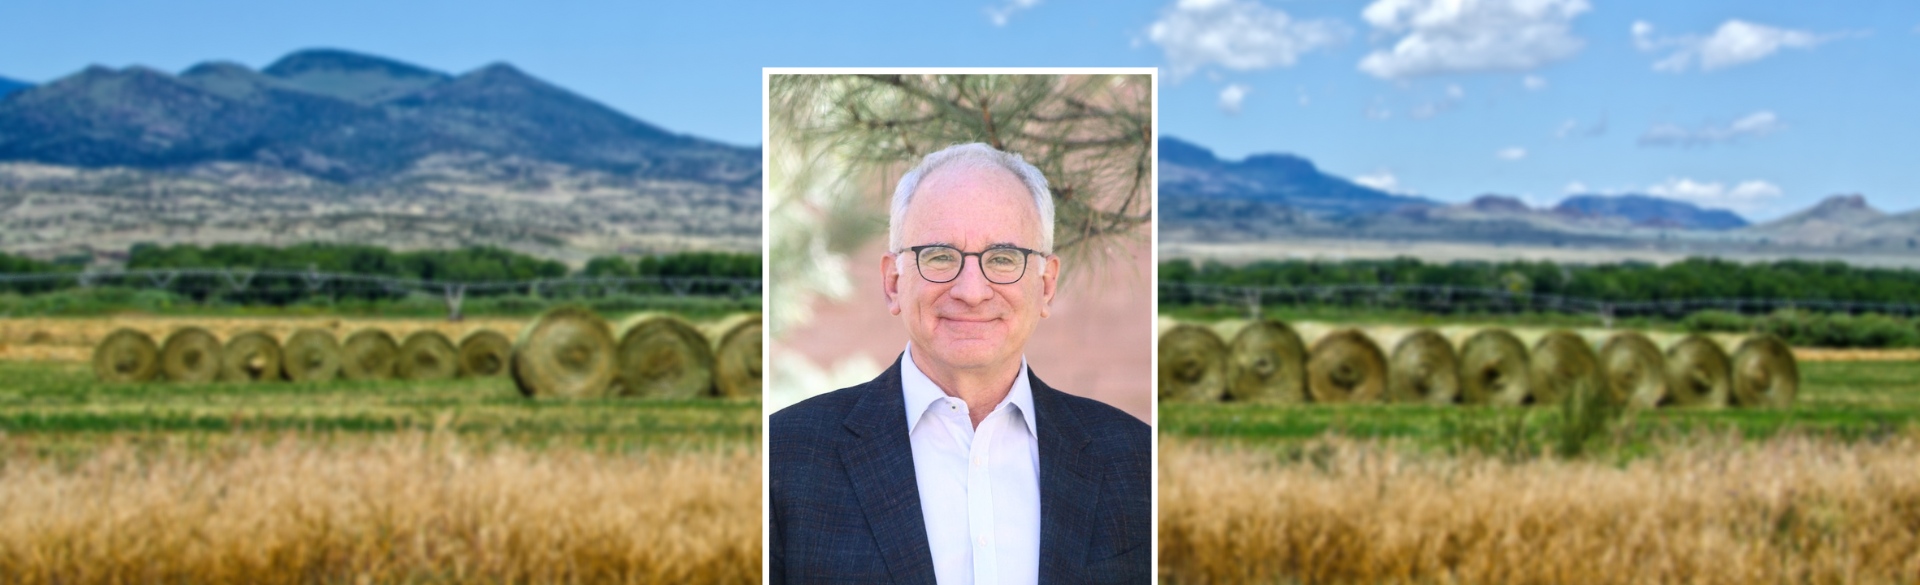 Man smiling in headshot on background of Colorado mountains